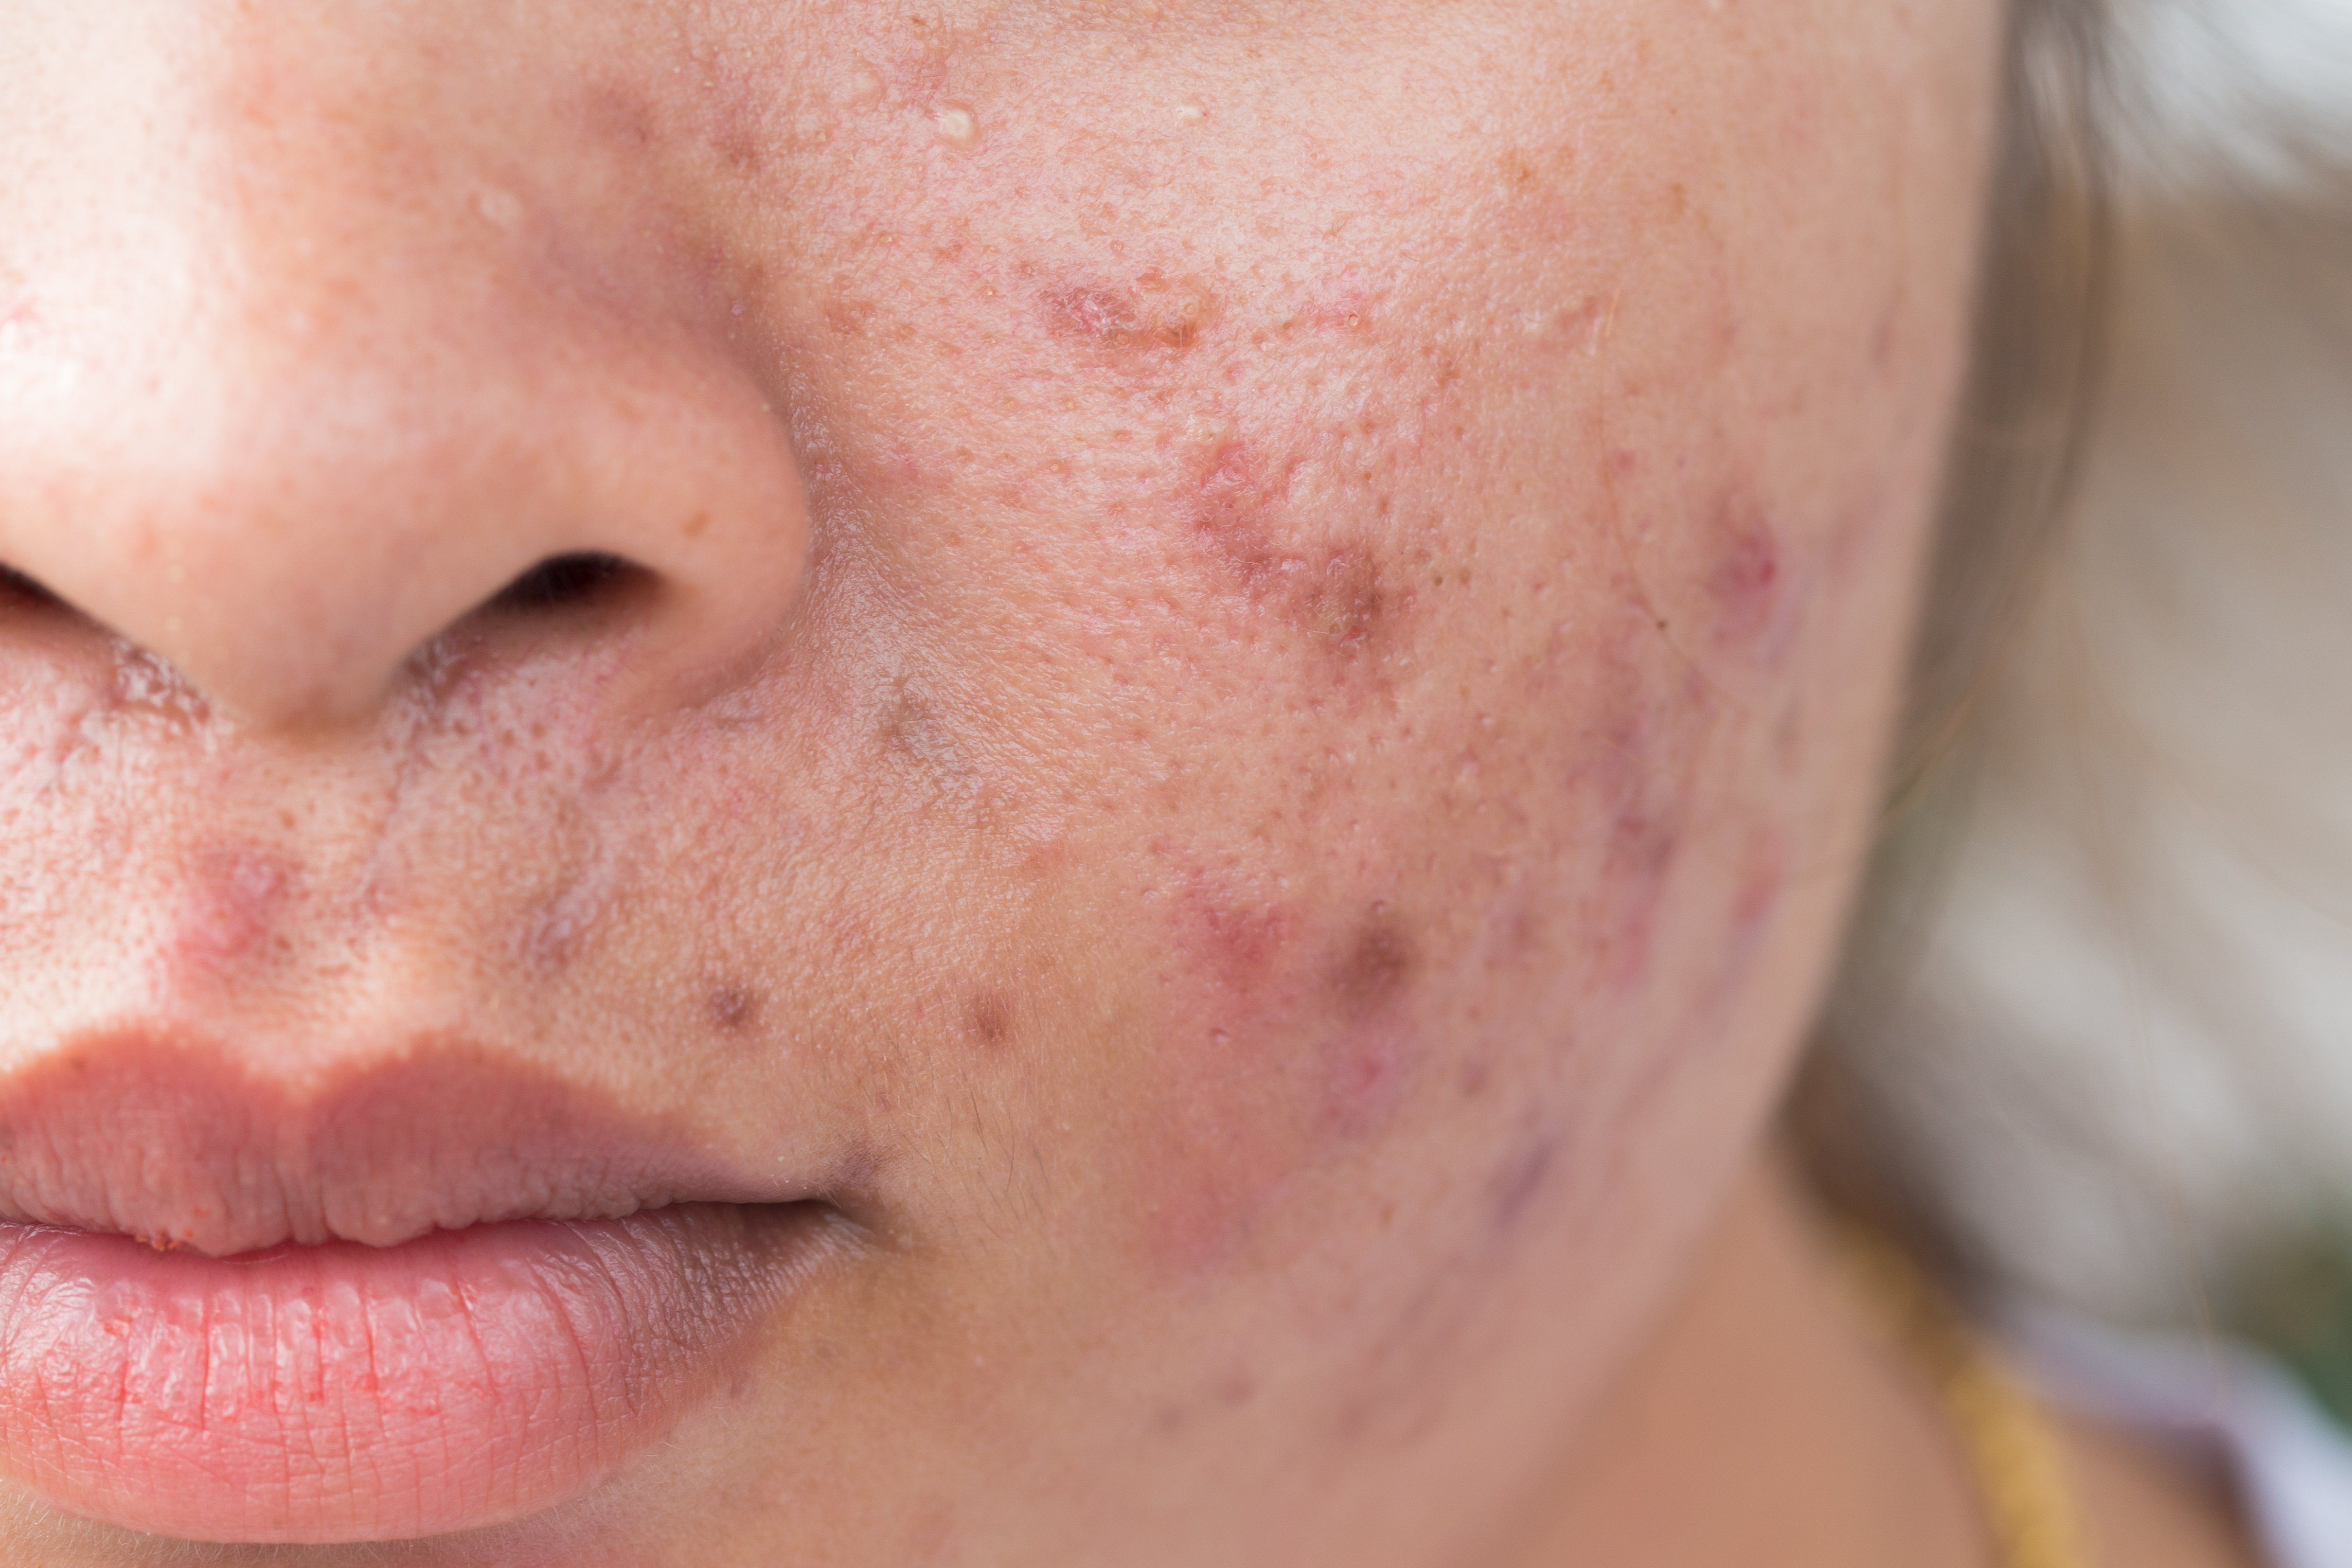 Treatment options for acne expand.